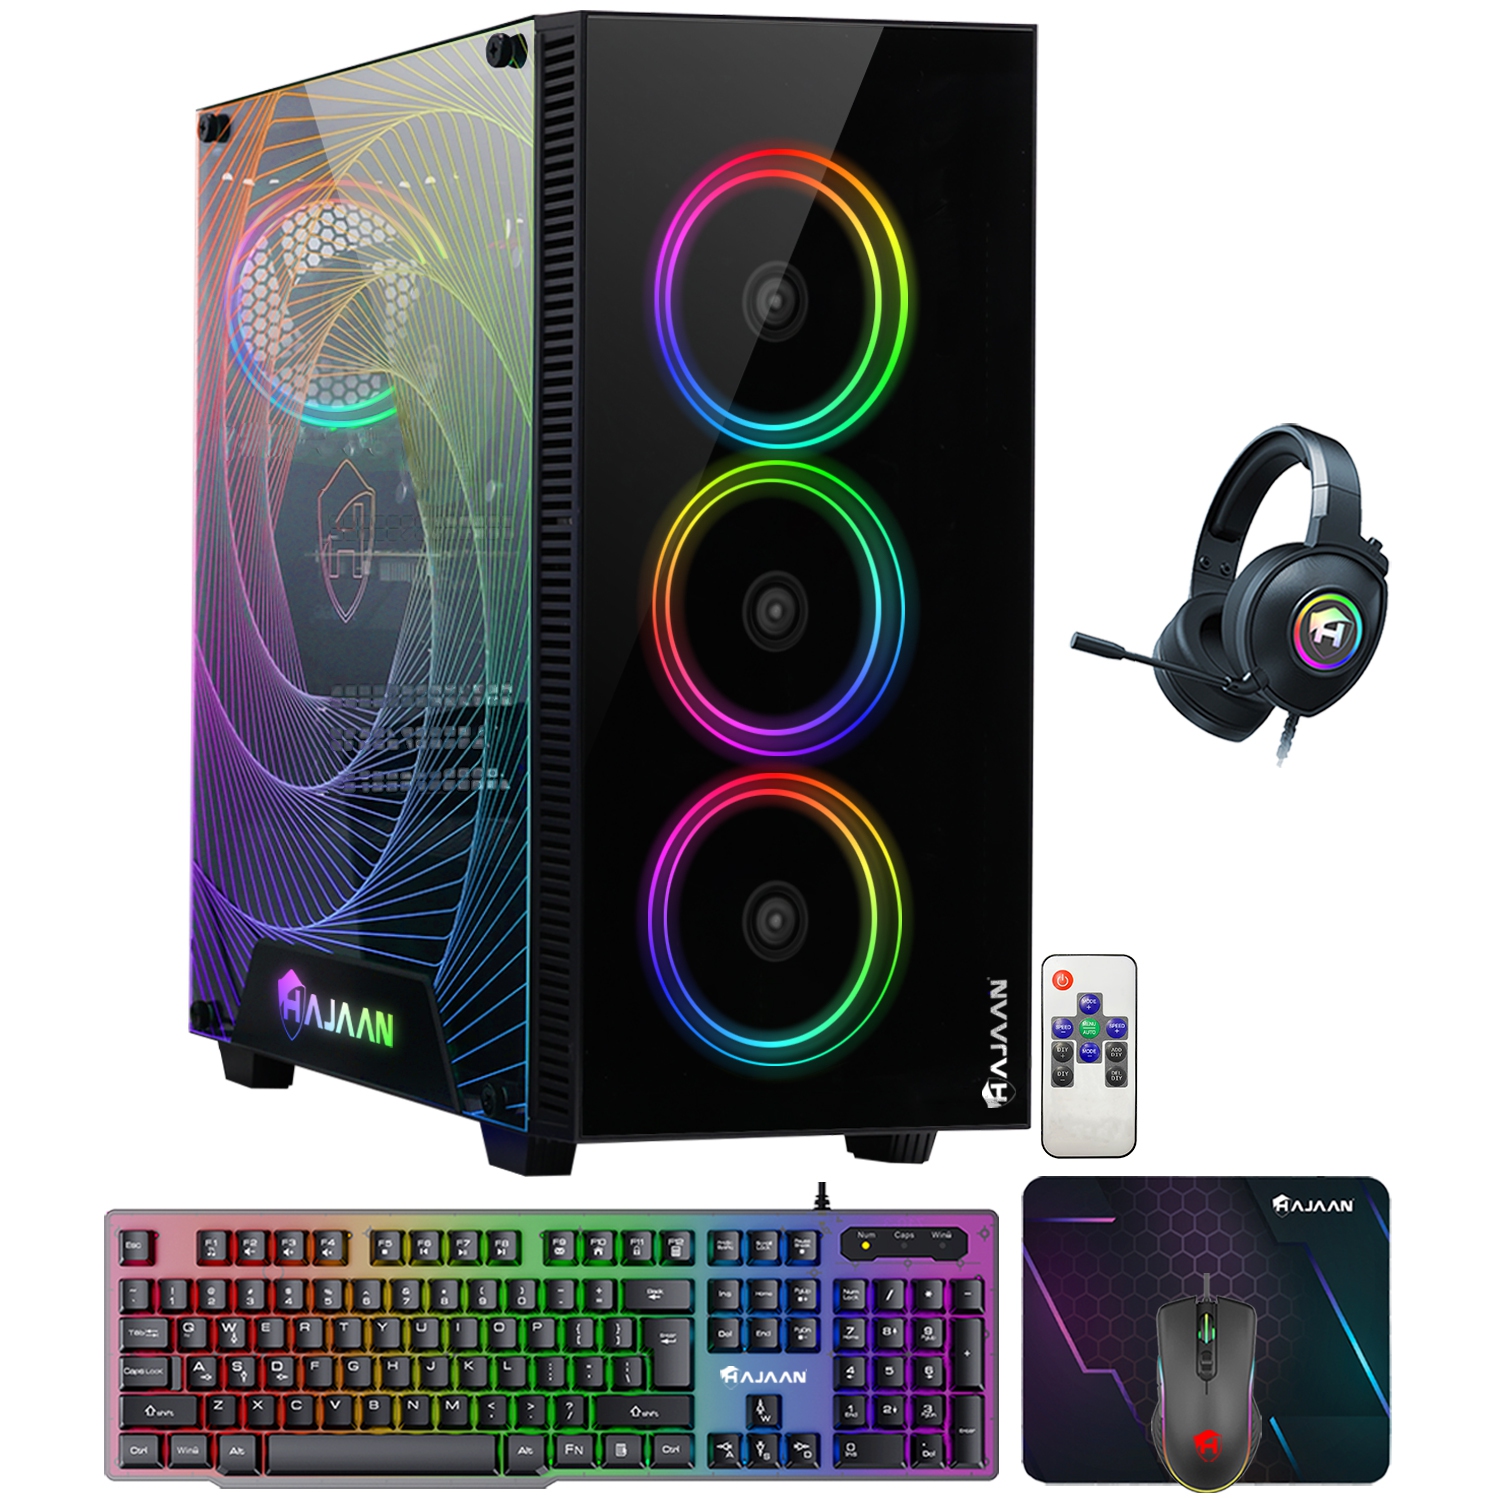 HAJAAN CYCLONIA Gaming Tower Computer Desktop PC - AMD Ryzen 7 5700G Processor Up to 4.6GHz - RTX 3060 12G GDDR6 - 32GB DDR4 - 1TB SSD - Windows 11 Pro - Keyboard Mouse and Headset